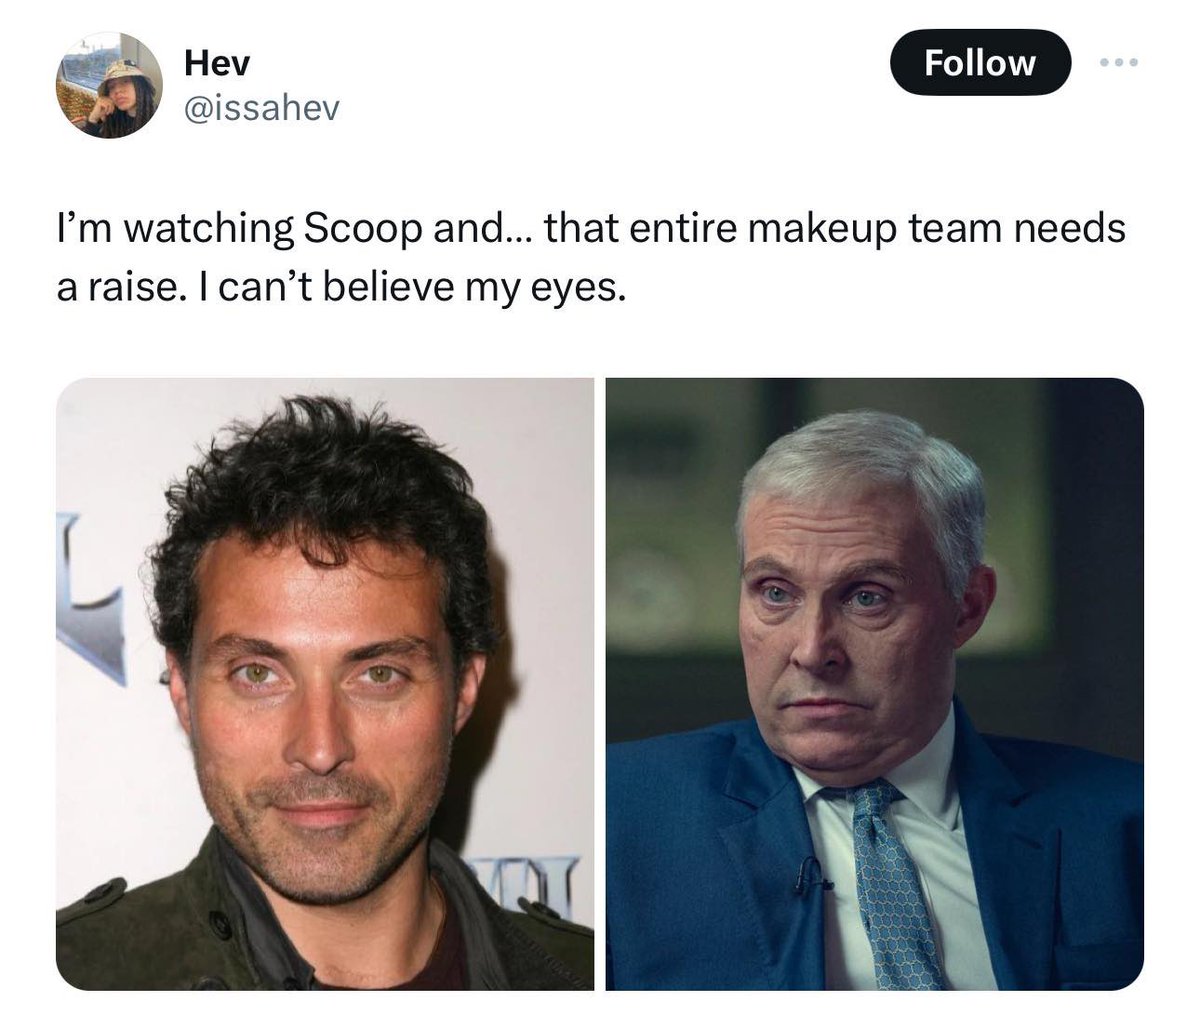 Well done to the Hair and Make-Up team on #Scoop. 👏 #tvjobs #filmjobs #lovingyourwork